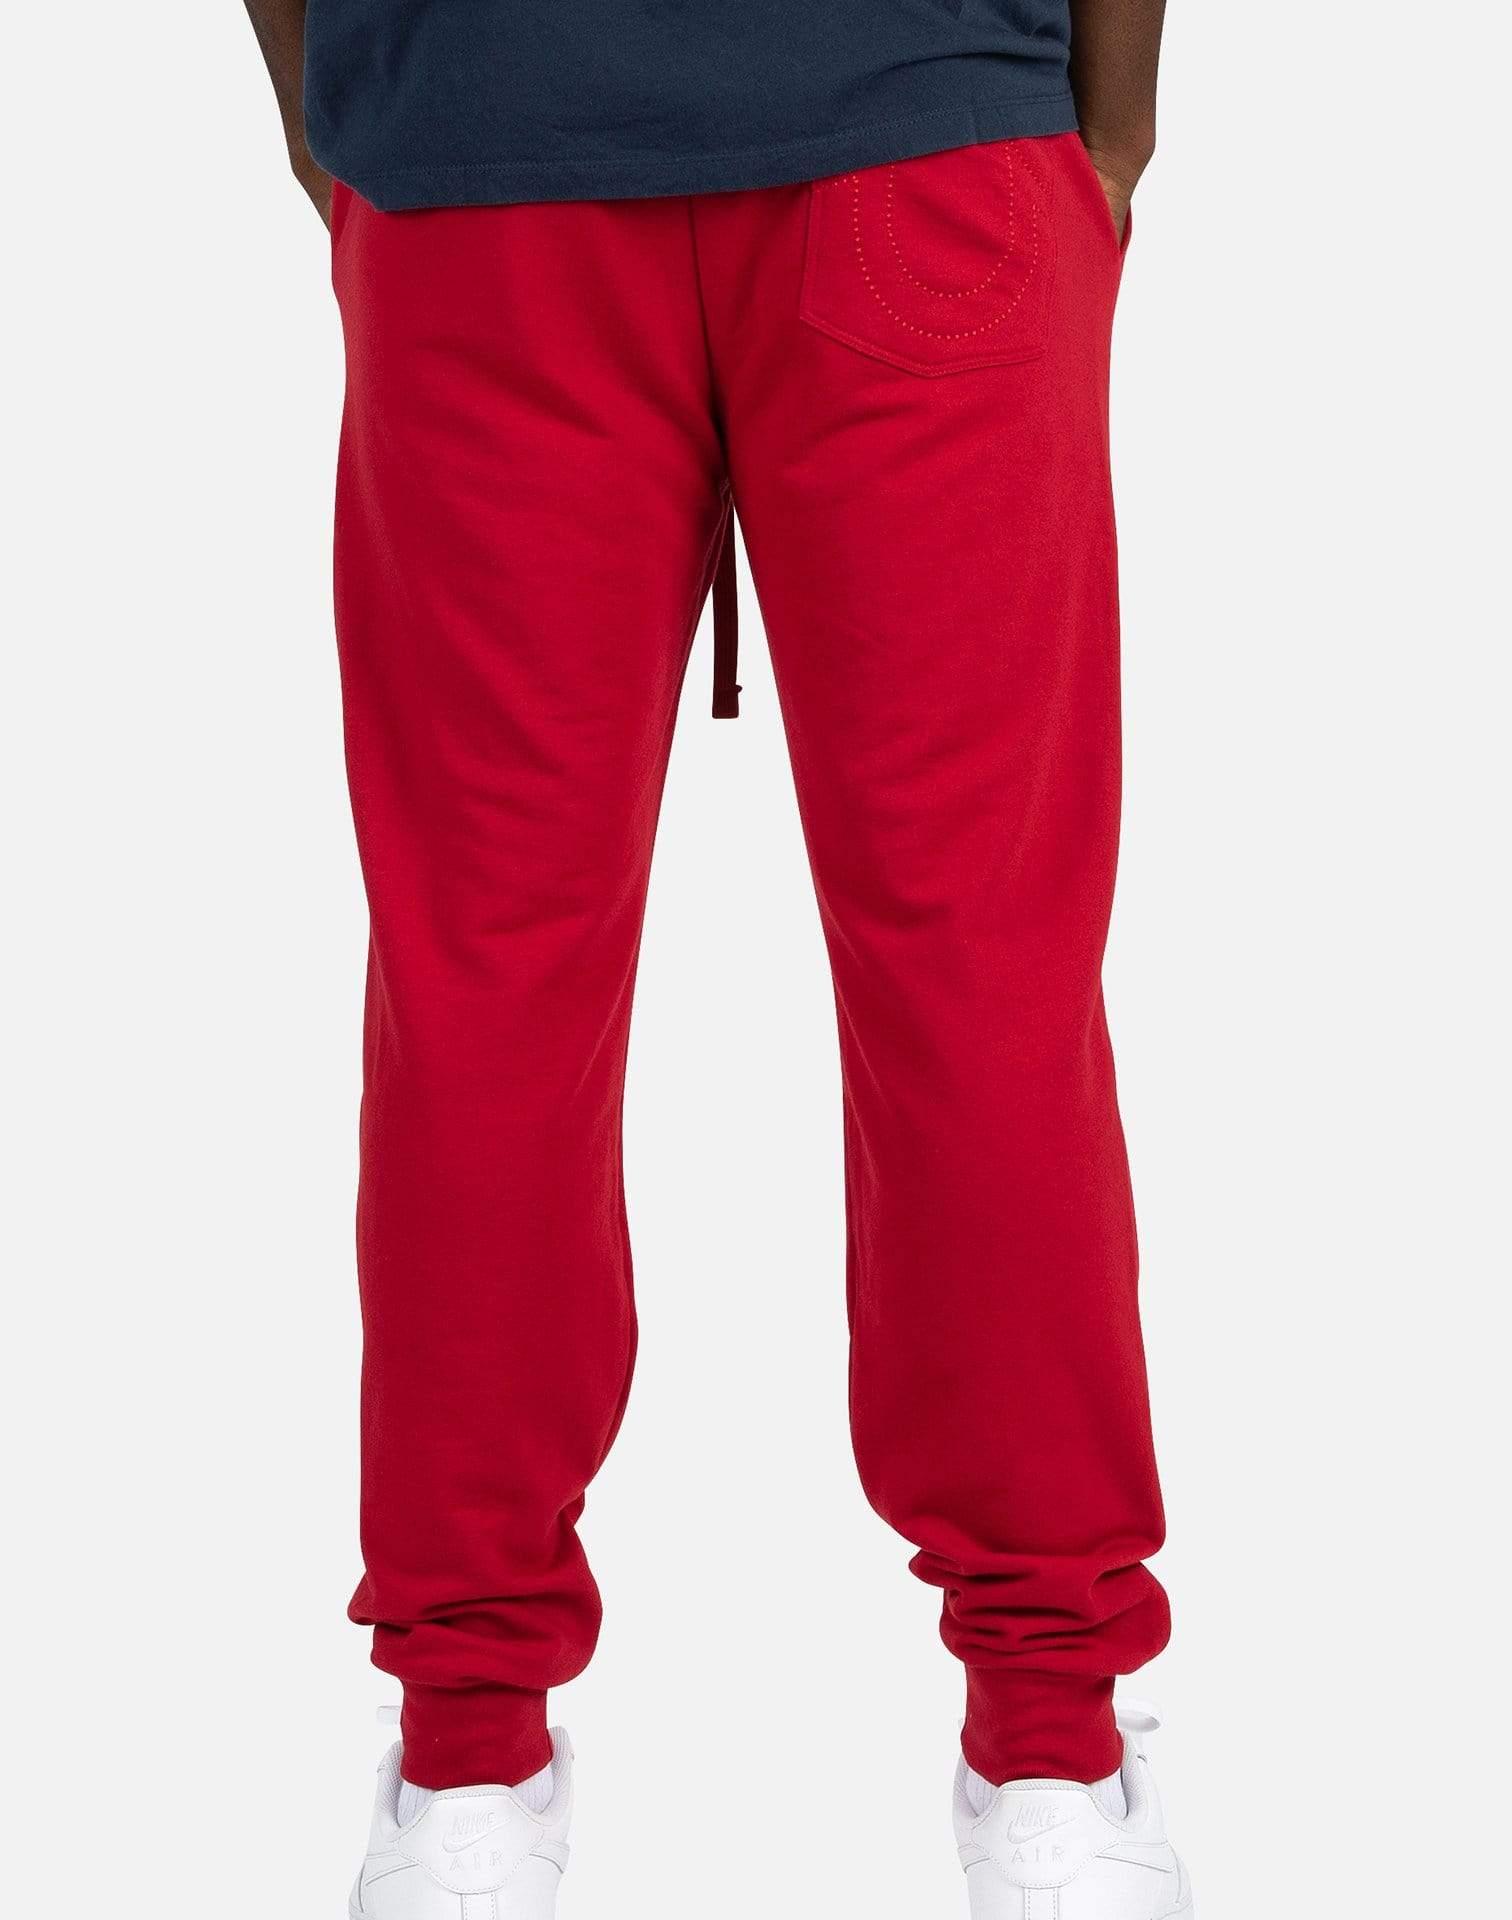 True Religion Cotton Classic Logo JOGGERS in Red for Men - Lyst